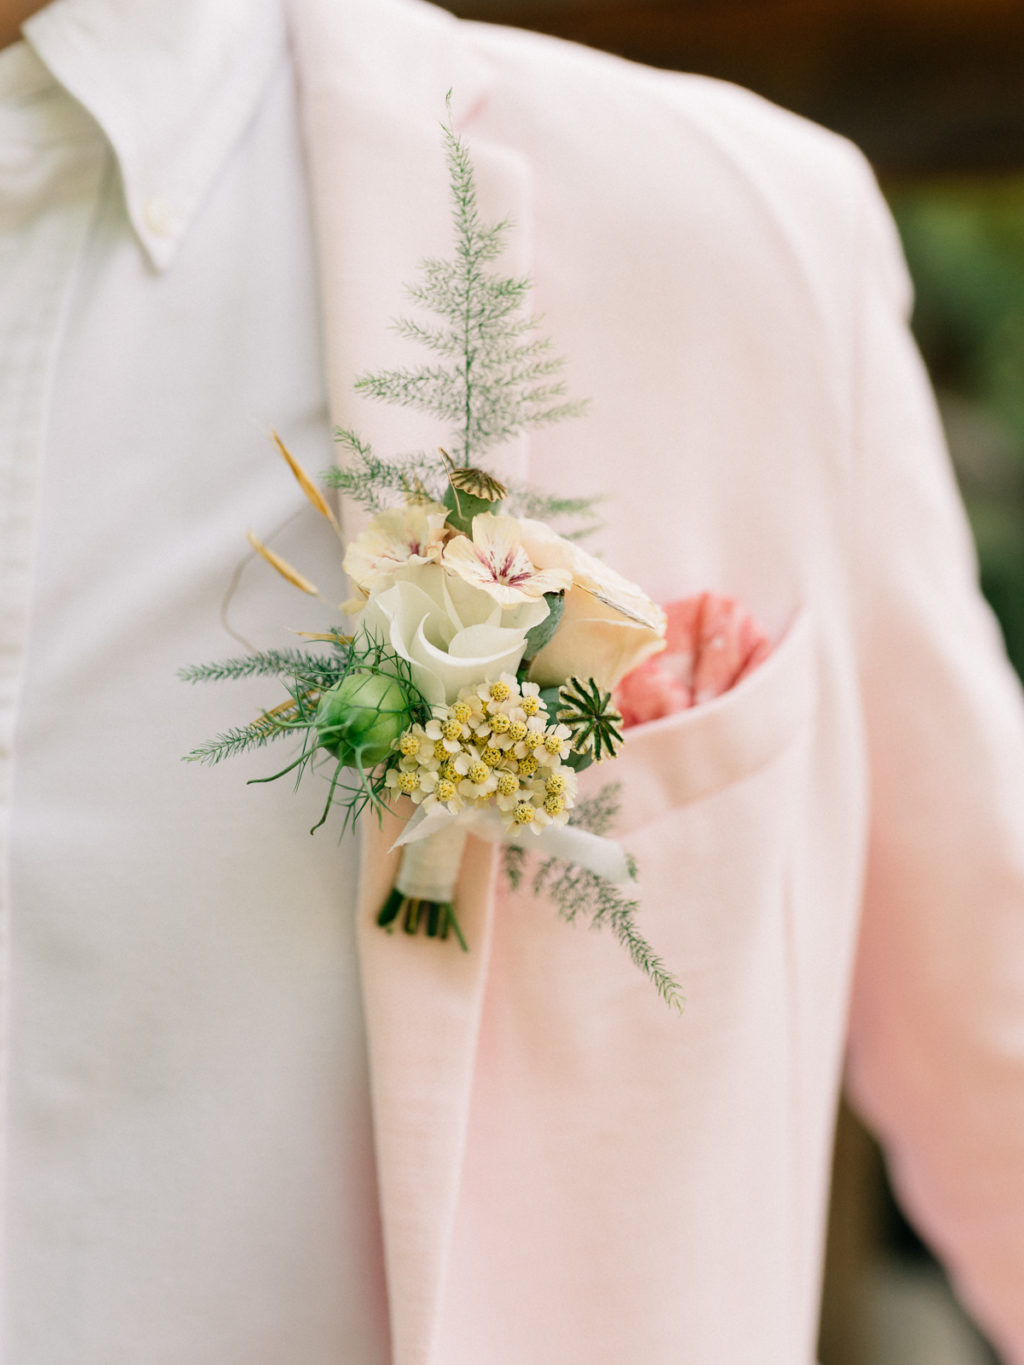 Sustainable Wedding With Spring Garden Styling At Kate's Garden Shropshire